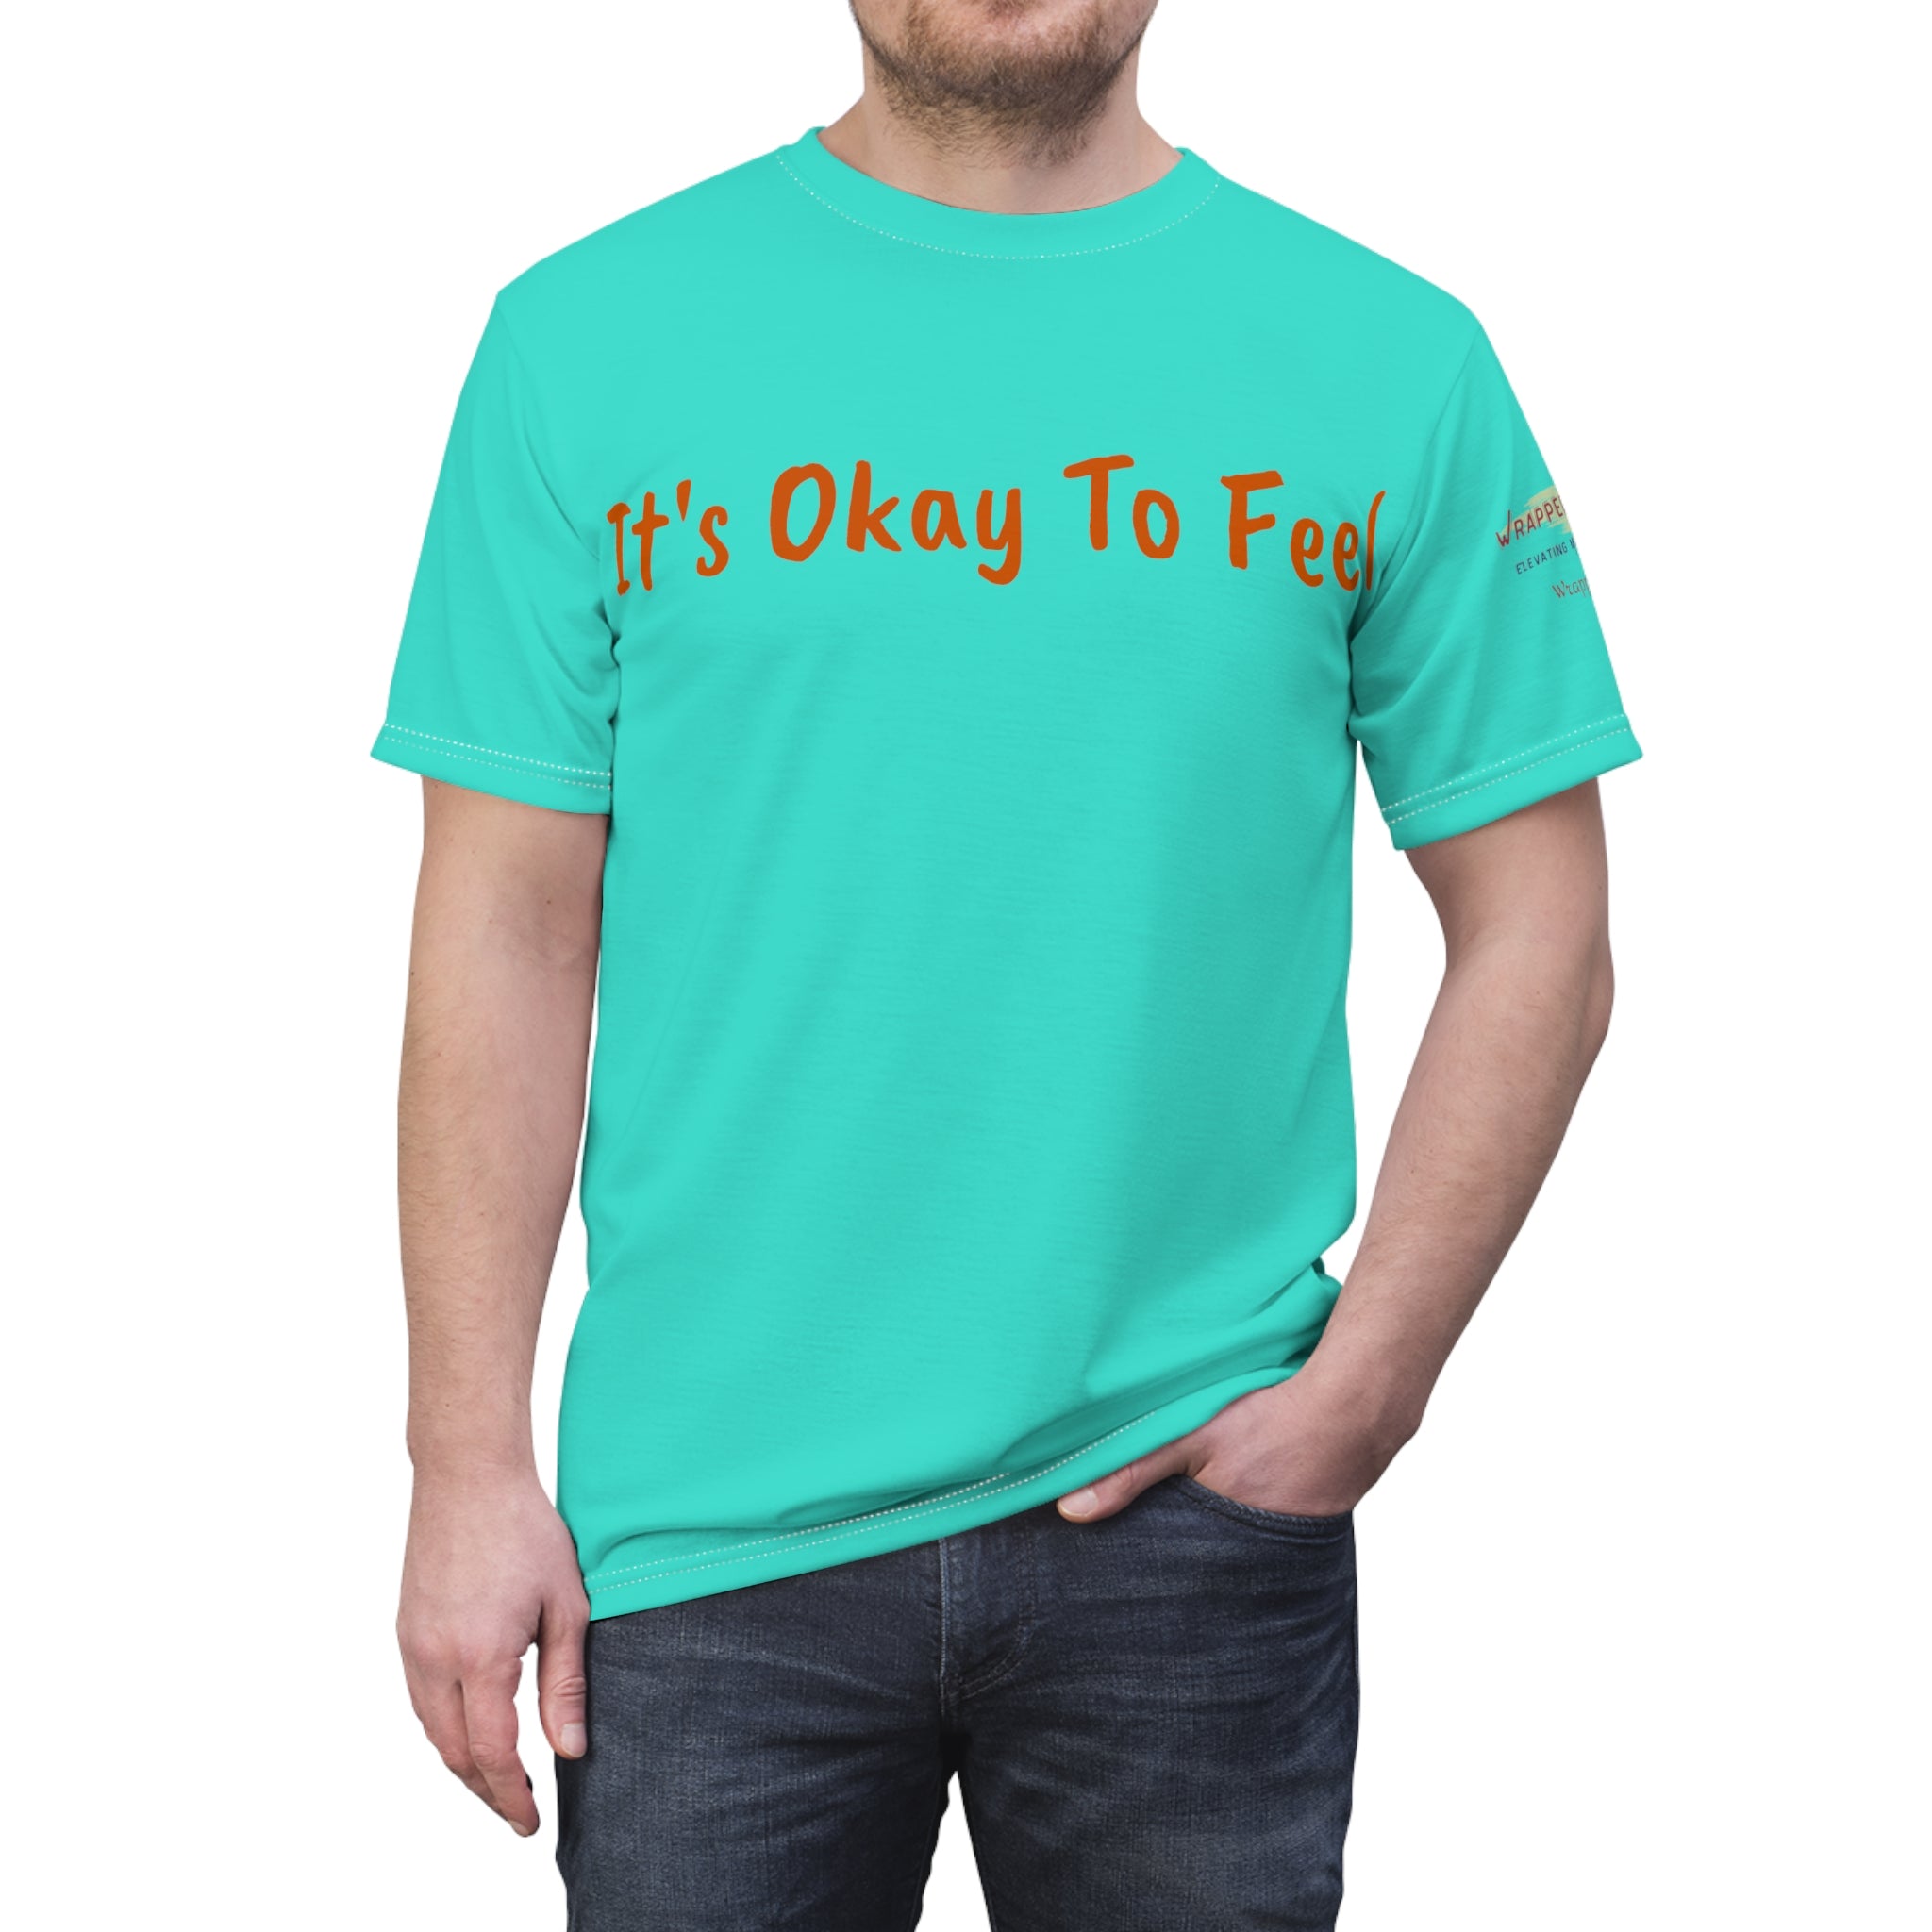 It's Okay to Feel - Unisex Cut & Sew Tee White stitching 4 oz. Athleisure Wear Comfort Cut & Sew Donation Feel Initiative Mental Health Normalization Polyester Tee Unisex All Over Prints 7674895506953869774_2048 Printify